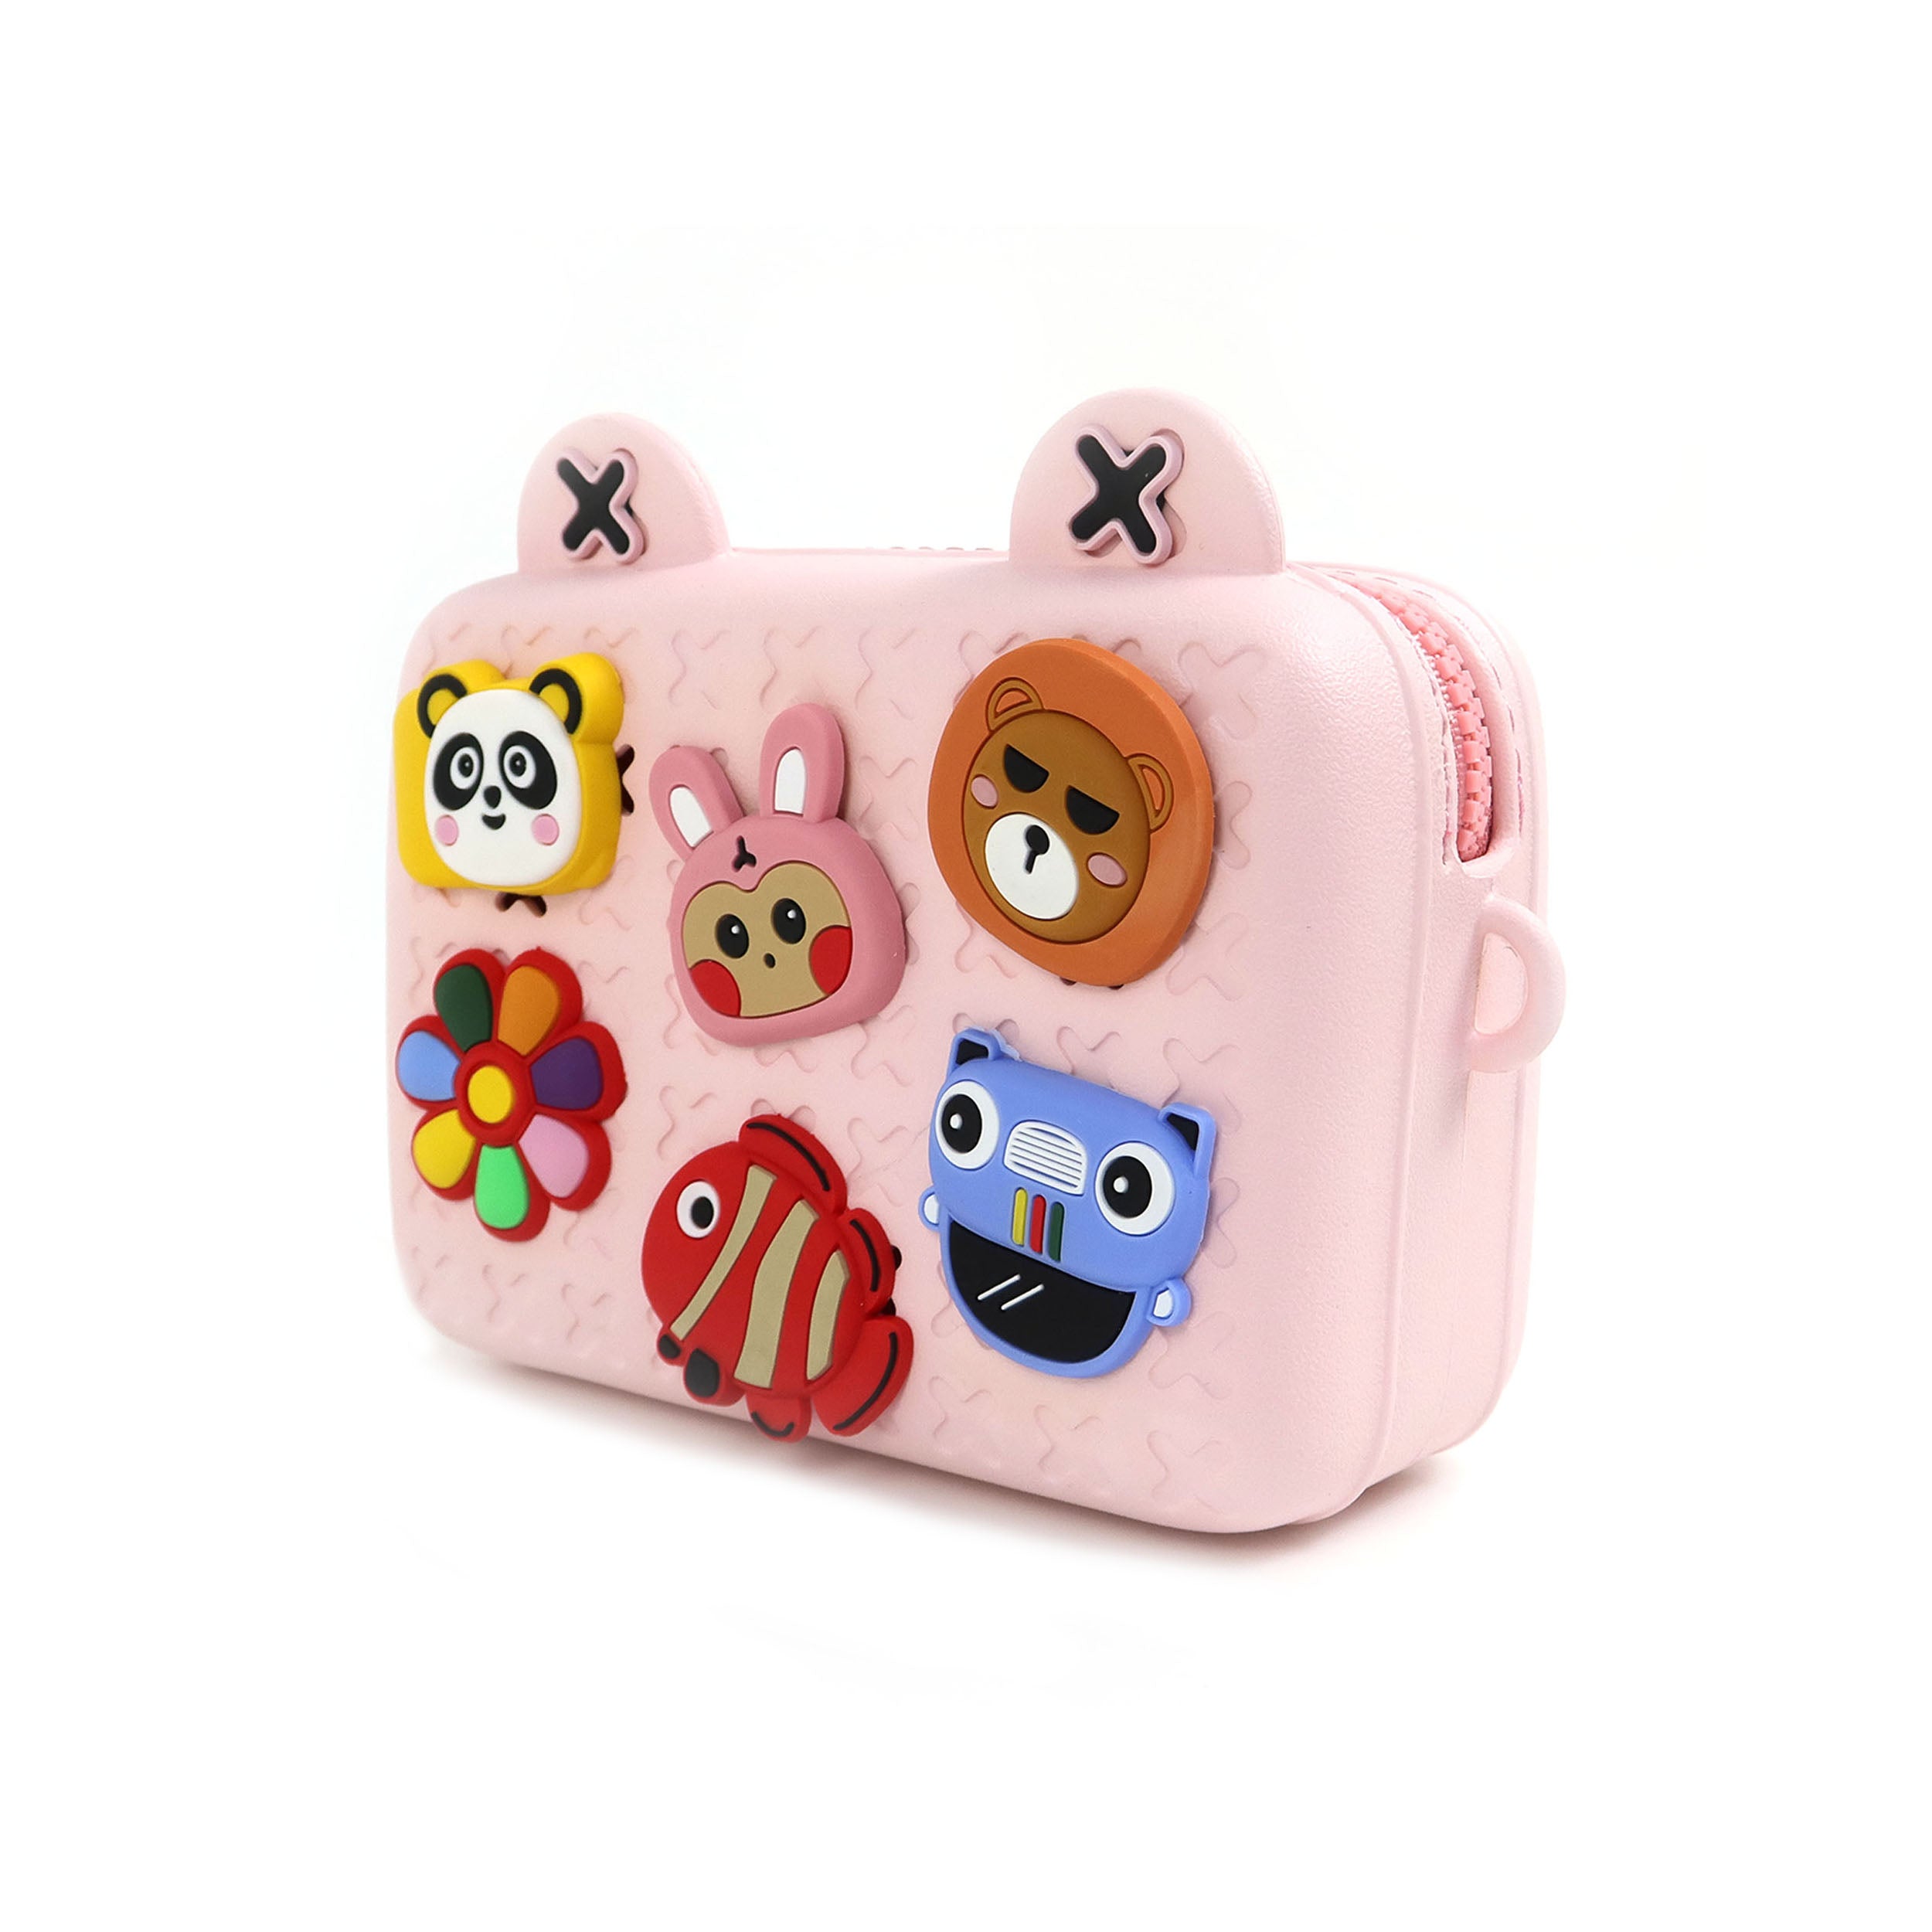 myFirst Camera Insta 2 Bag - Oaxis - The Official Maker of InkCase and the brand owner of myFirst - A brand new collection for kids